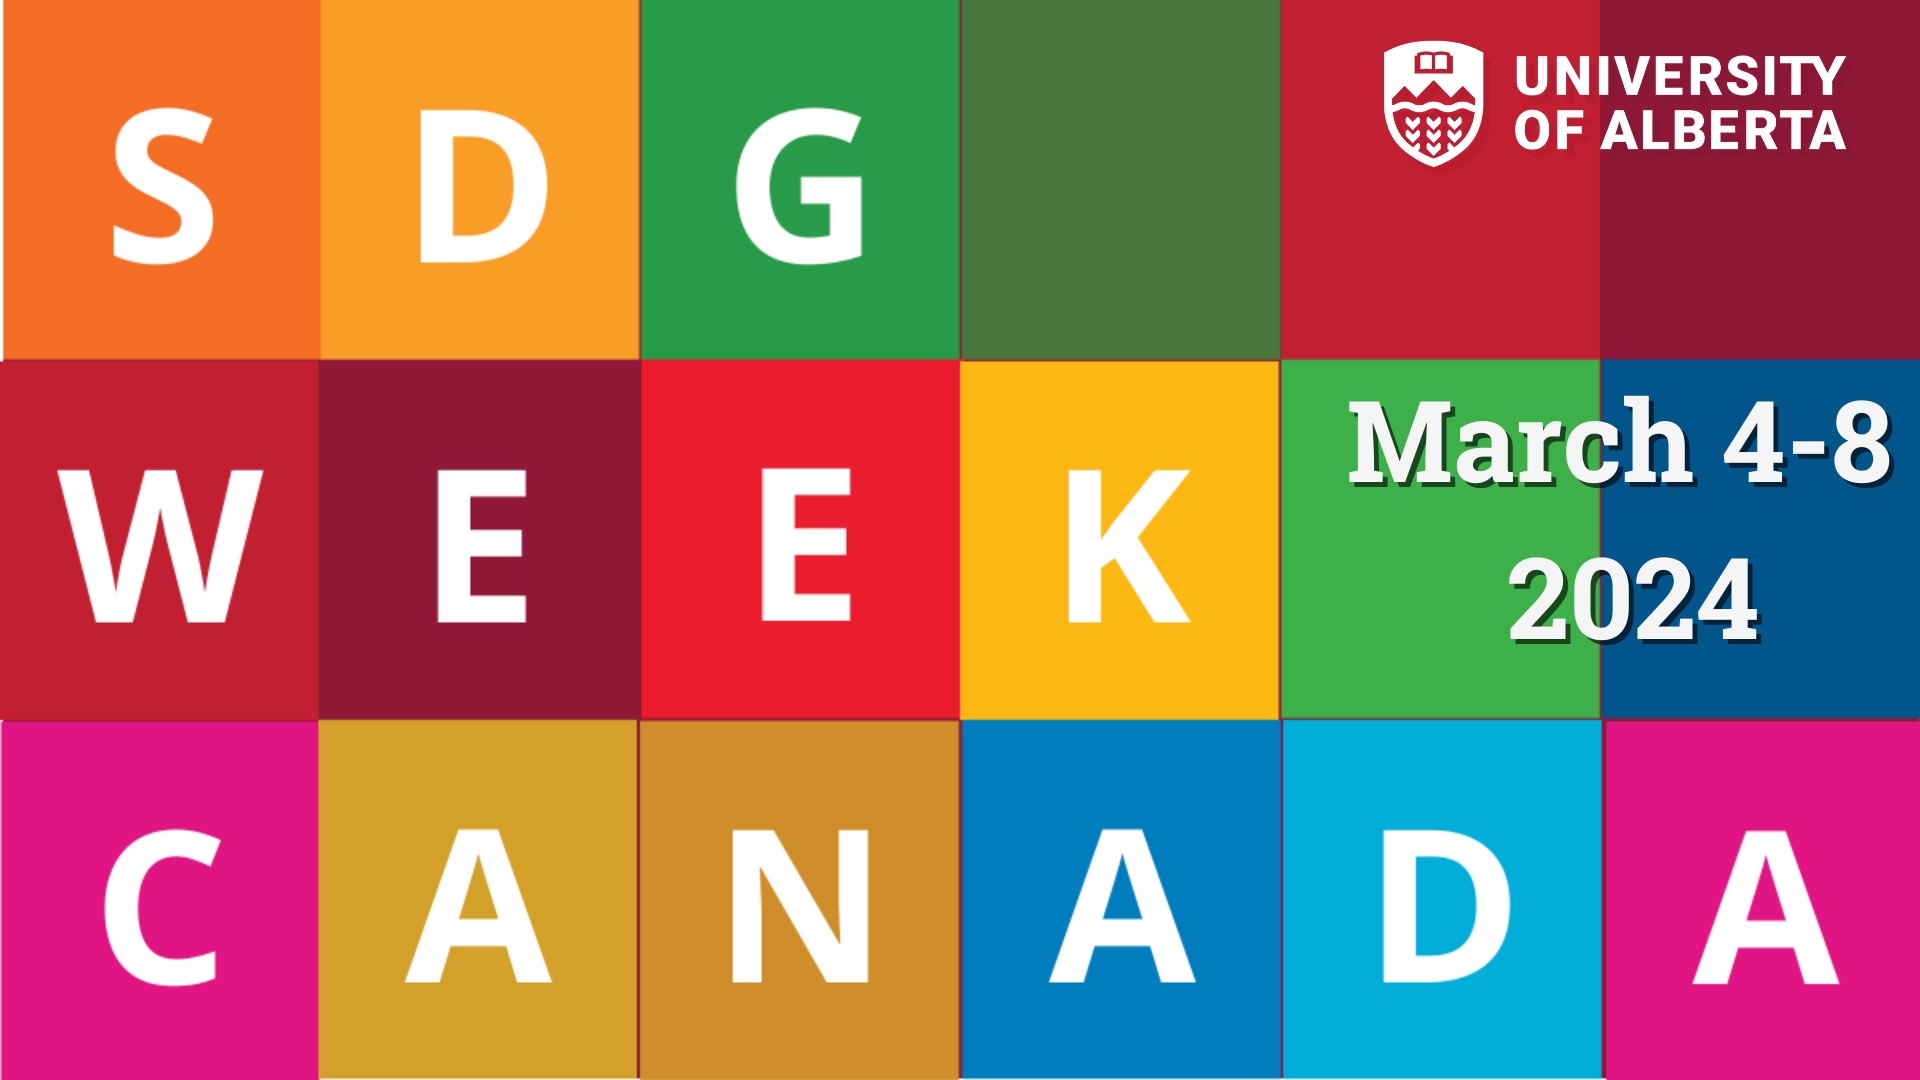 Decorative banner in colorful sustainable development goal tile format reads SDG Week Canada March 4-8, 2024 with the U of A logo